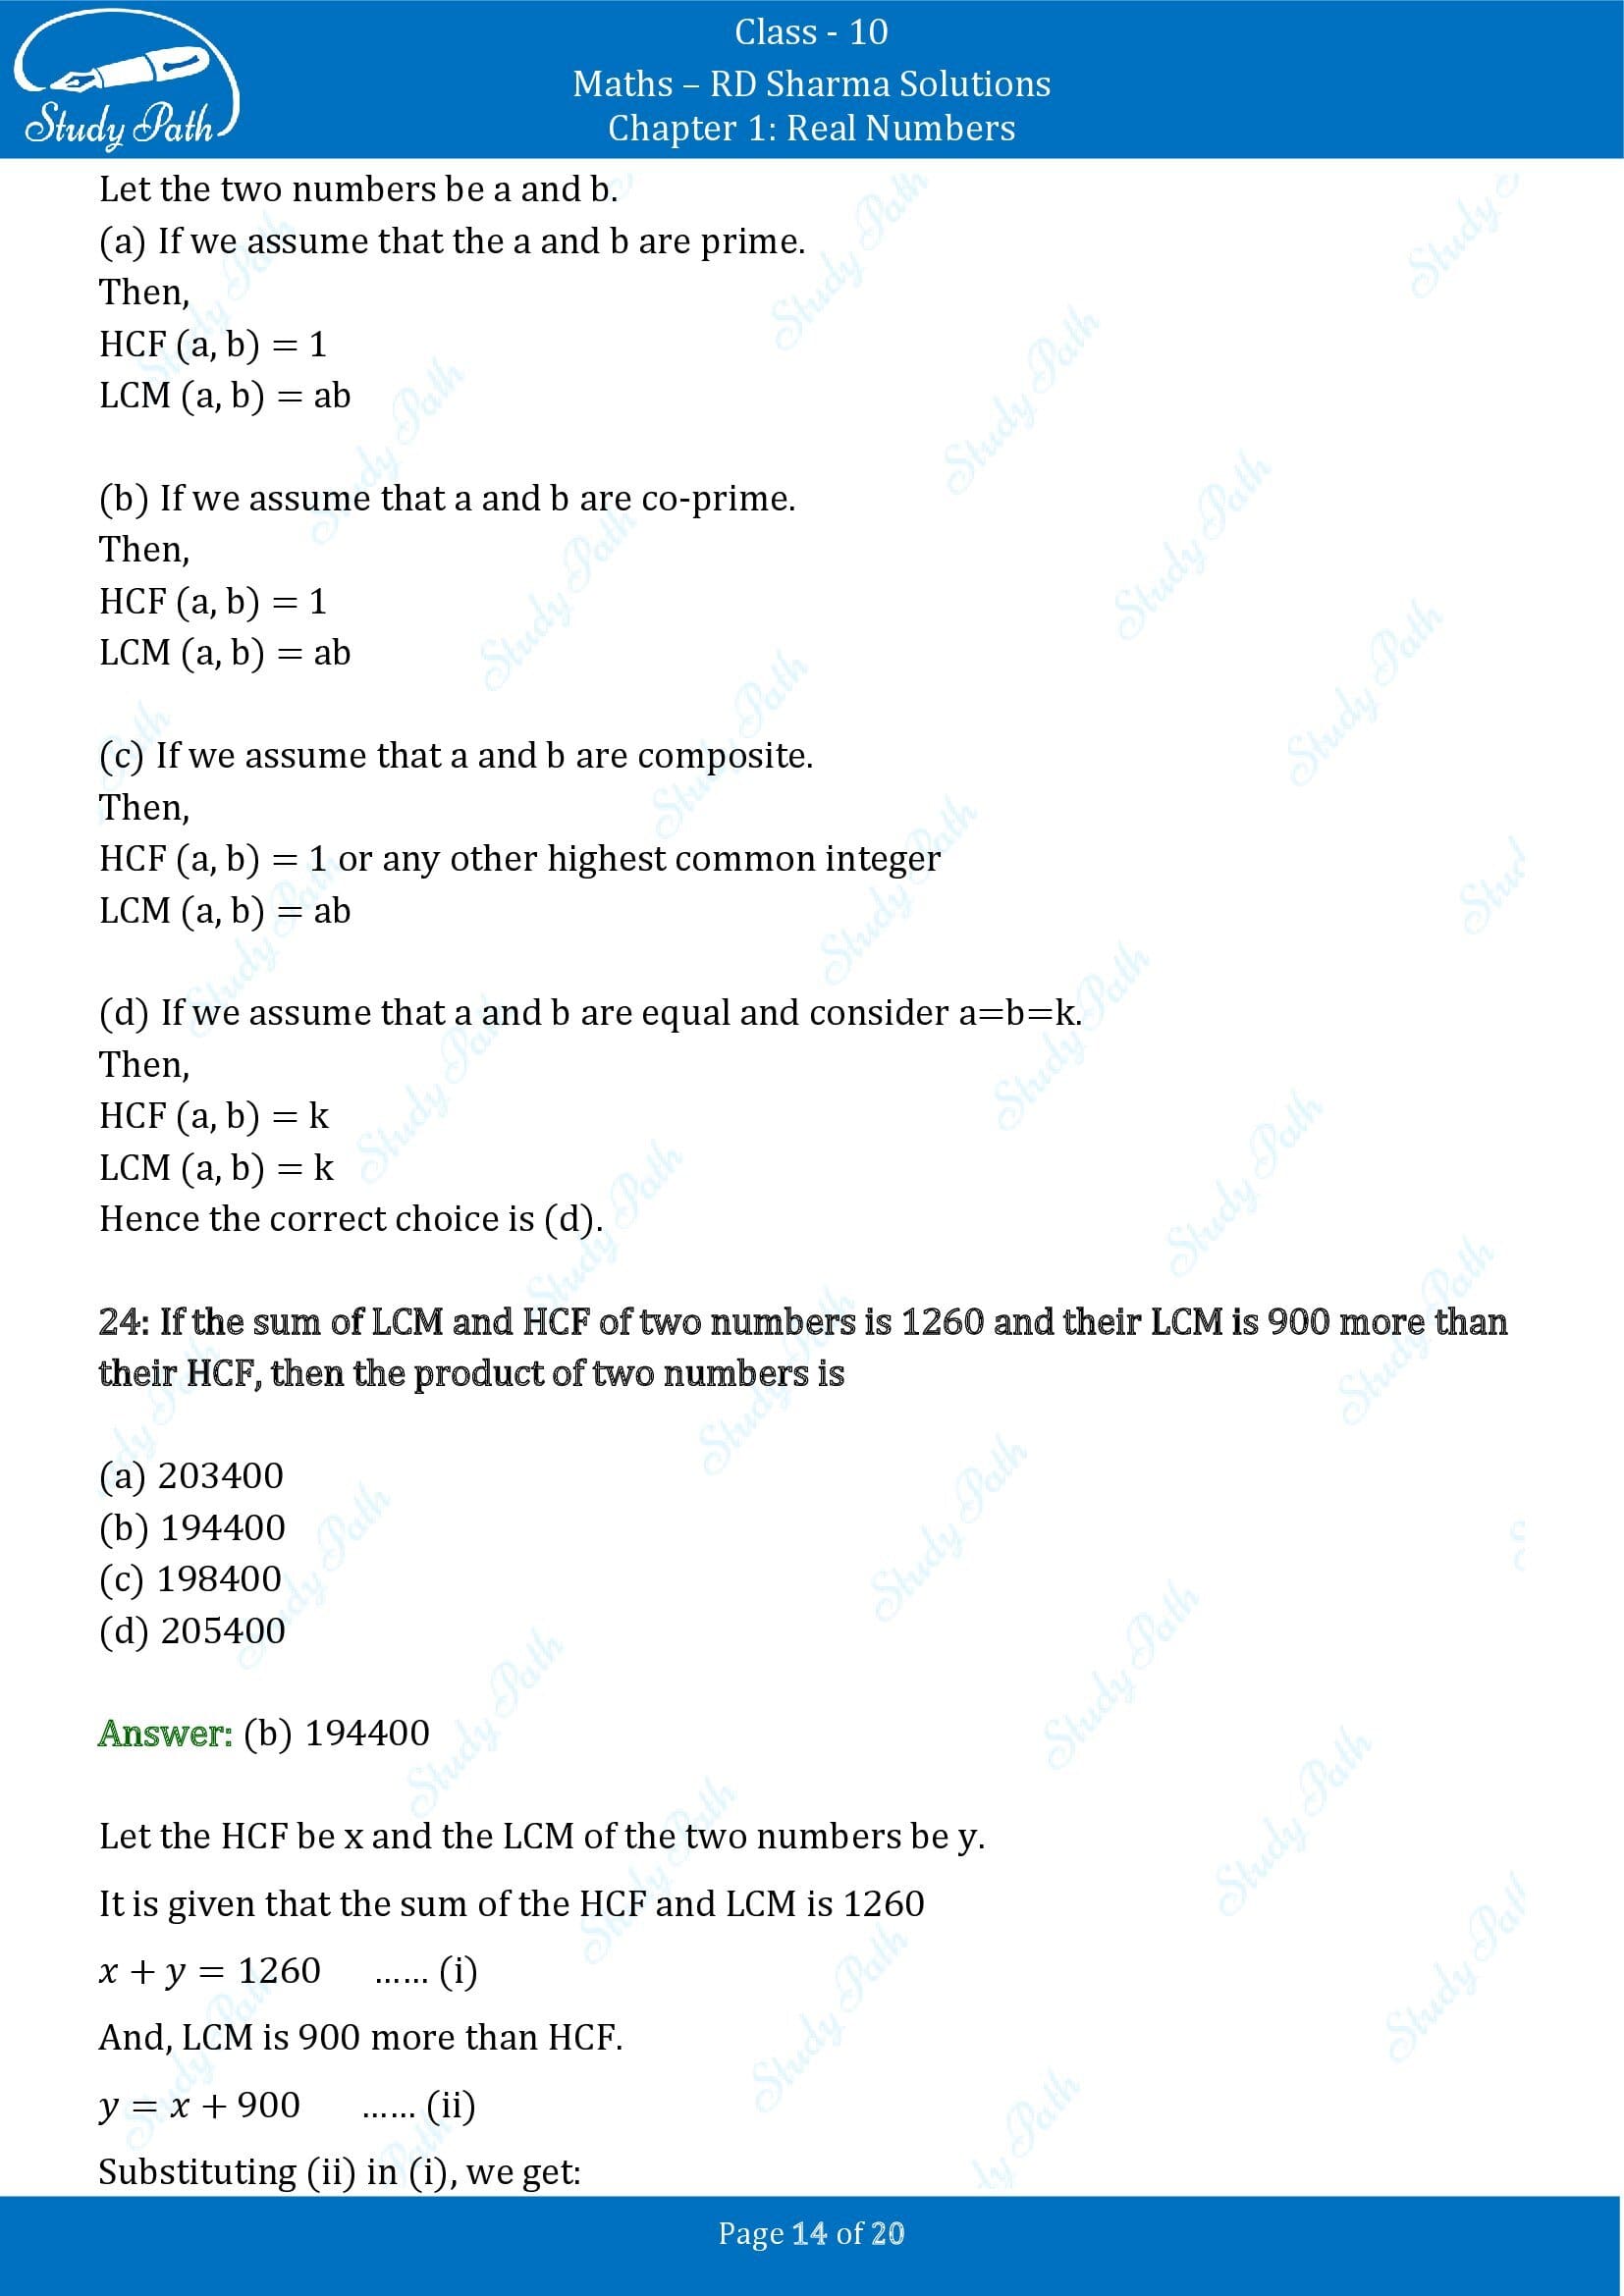 RD Sharma Solutions Class 10 Chapter 1 Real Numbers Multiple Choice Questions MCQs 00014